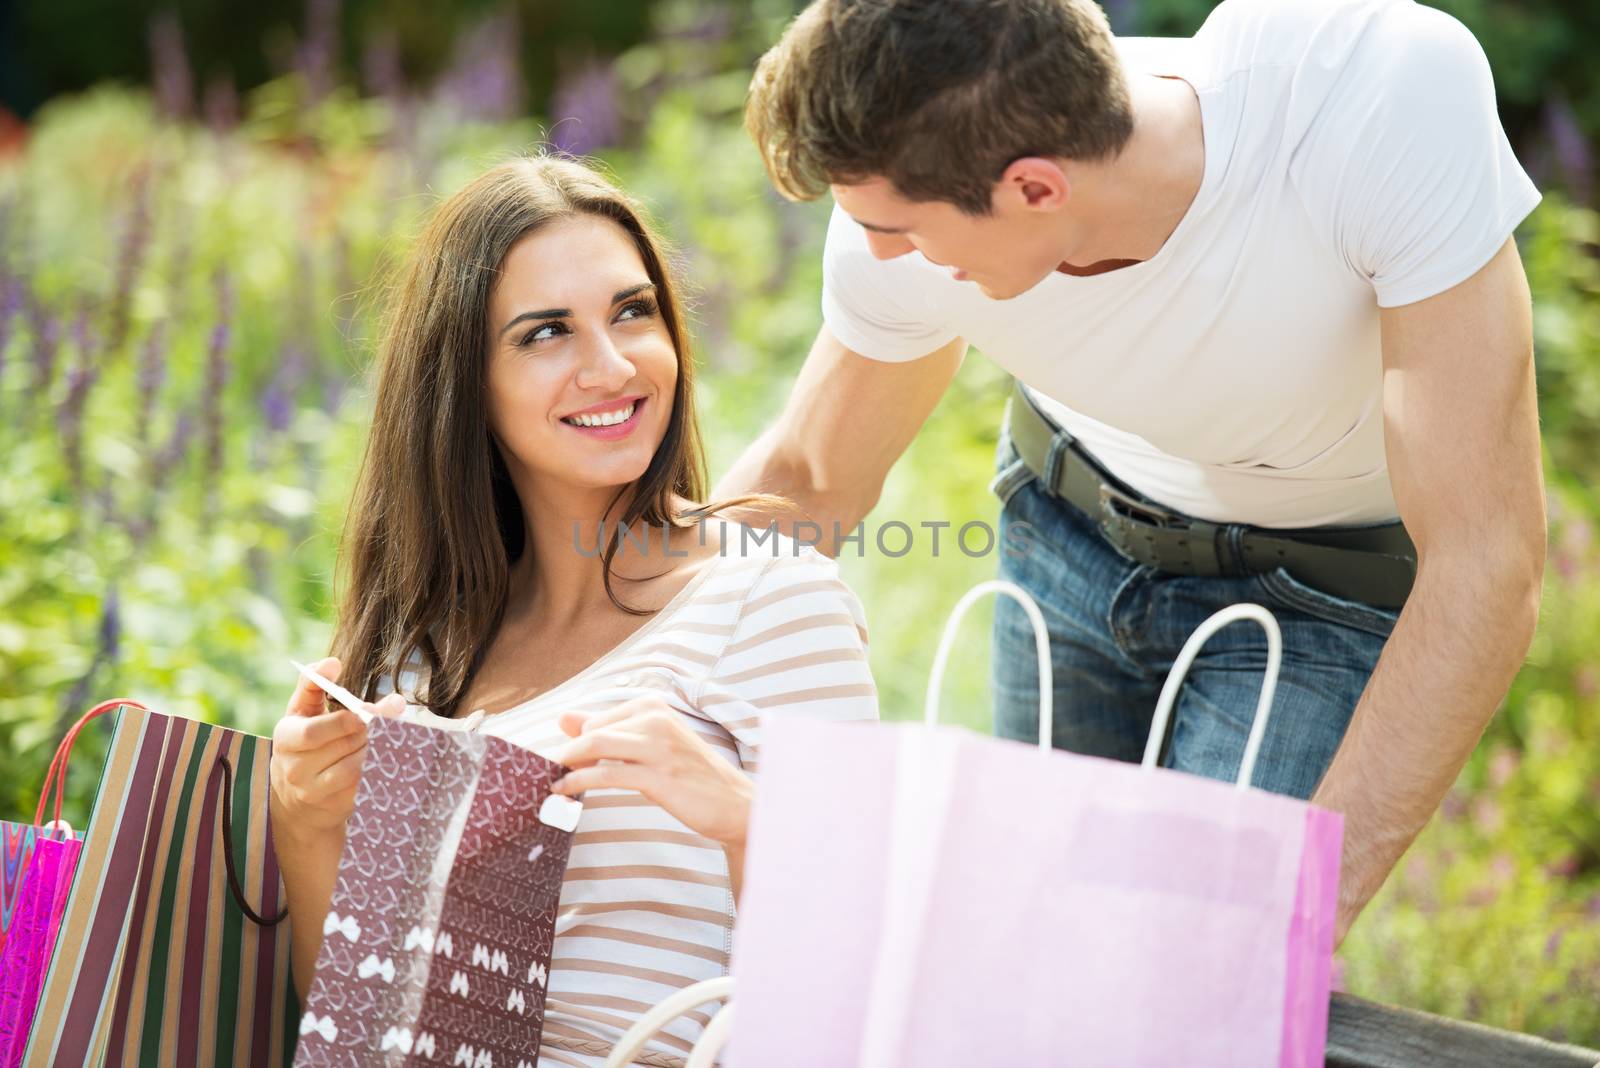 A young girl sitting on a park bench enjoying the beautiful sunny day, resting from shopping in addition to a bunch of shopping bags, holding a bag in his hand with a smile, looking at her boyfriend who was behind the bench leaning toward her face.